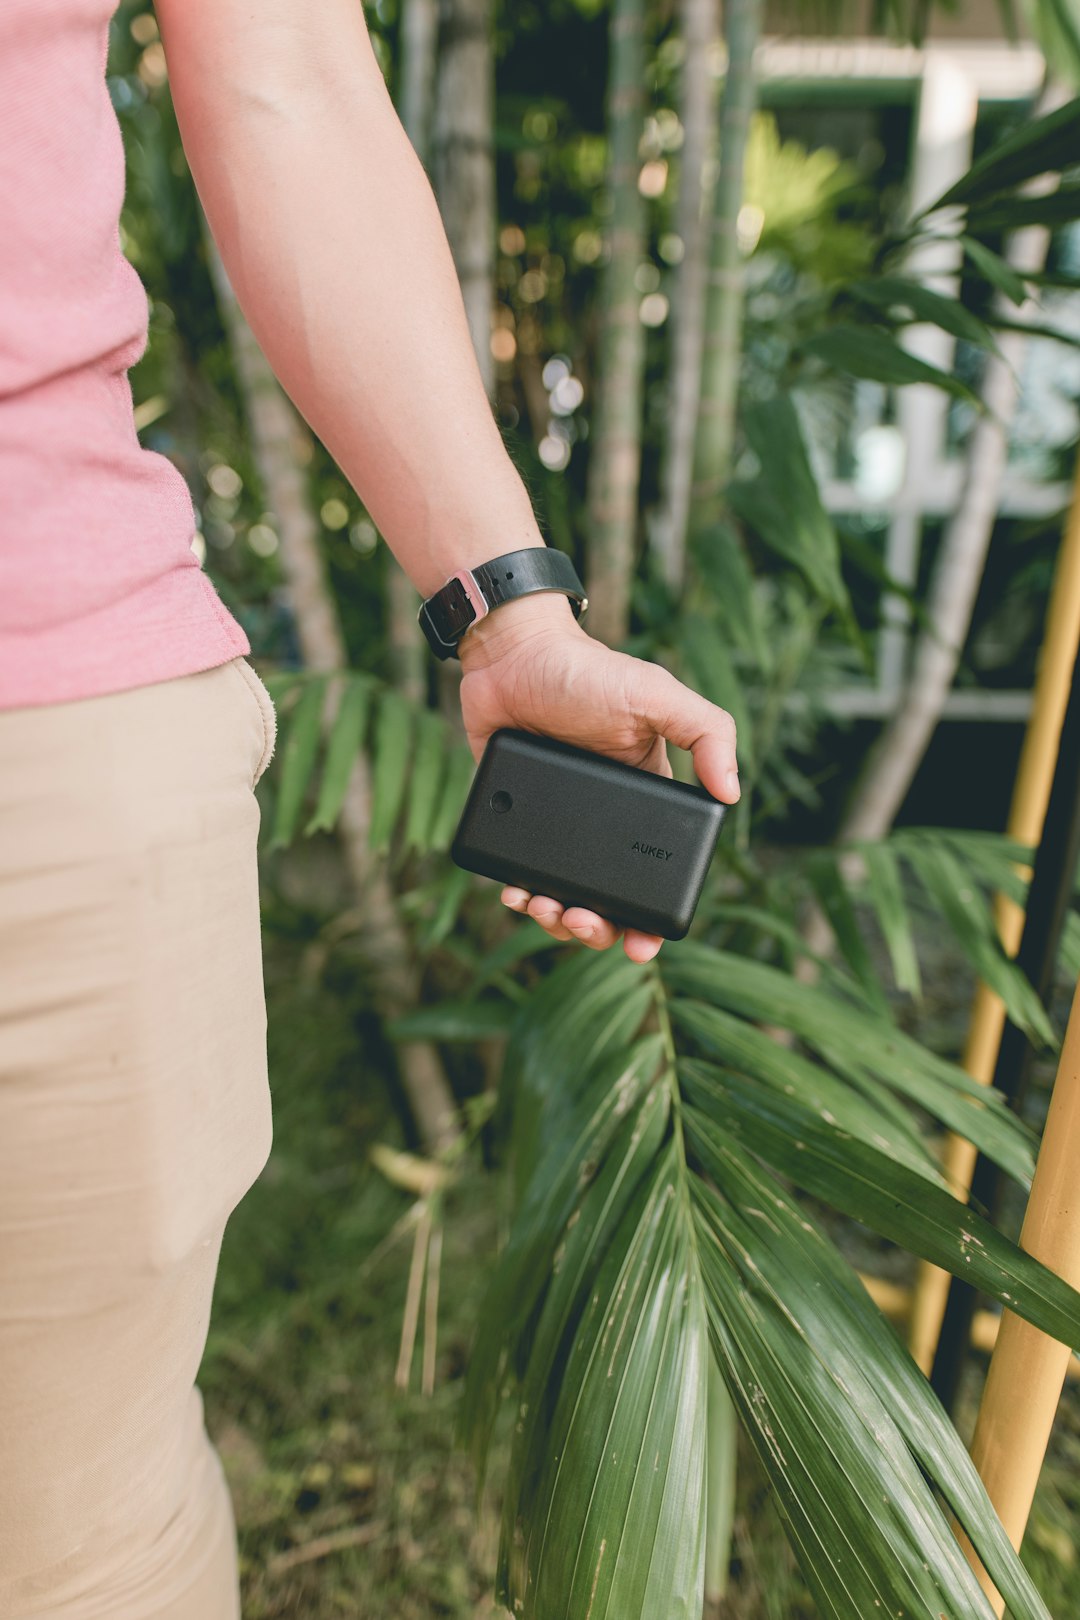 person holds black device near plants